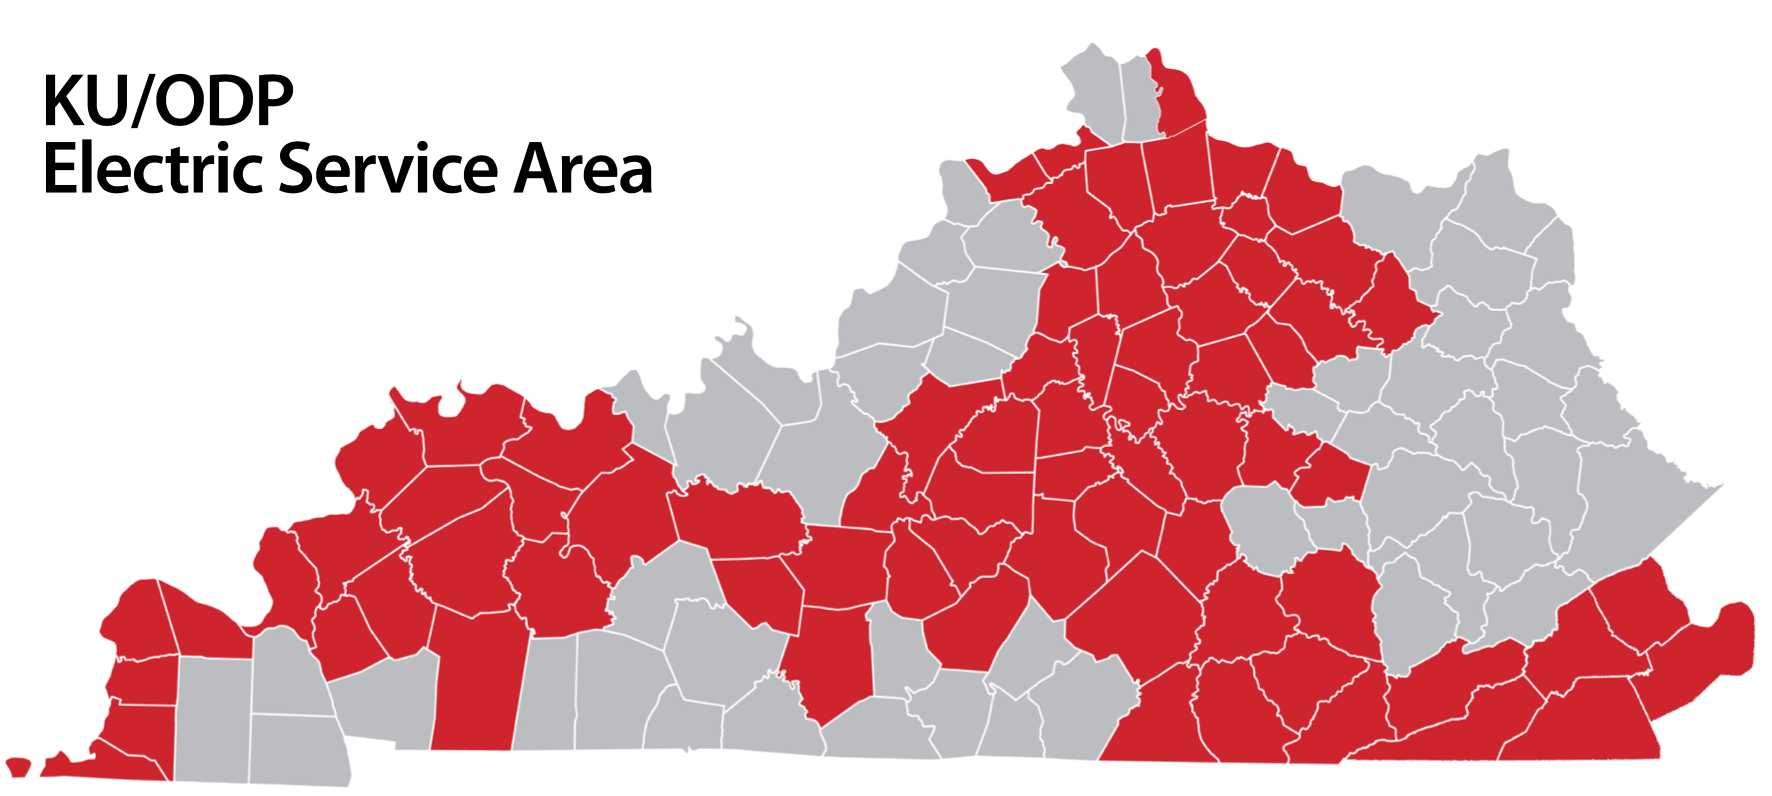 kentucky-power-outages-27-ky-power-outage-map-online-map-around-the